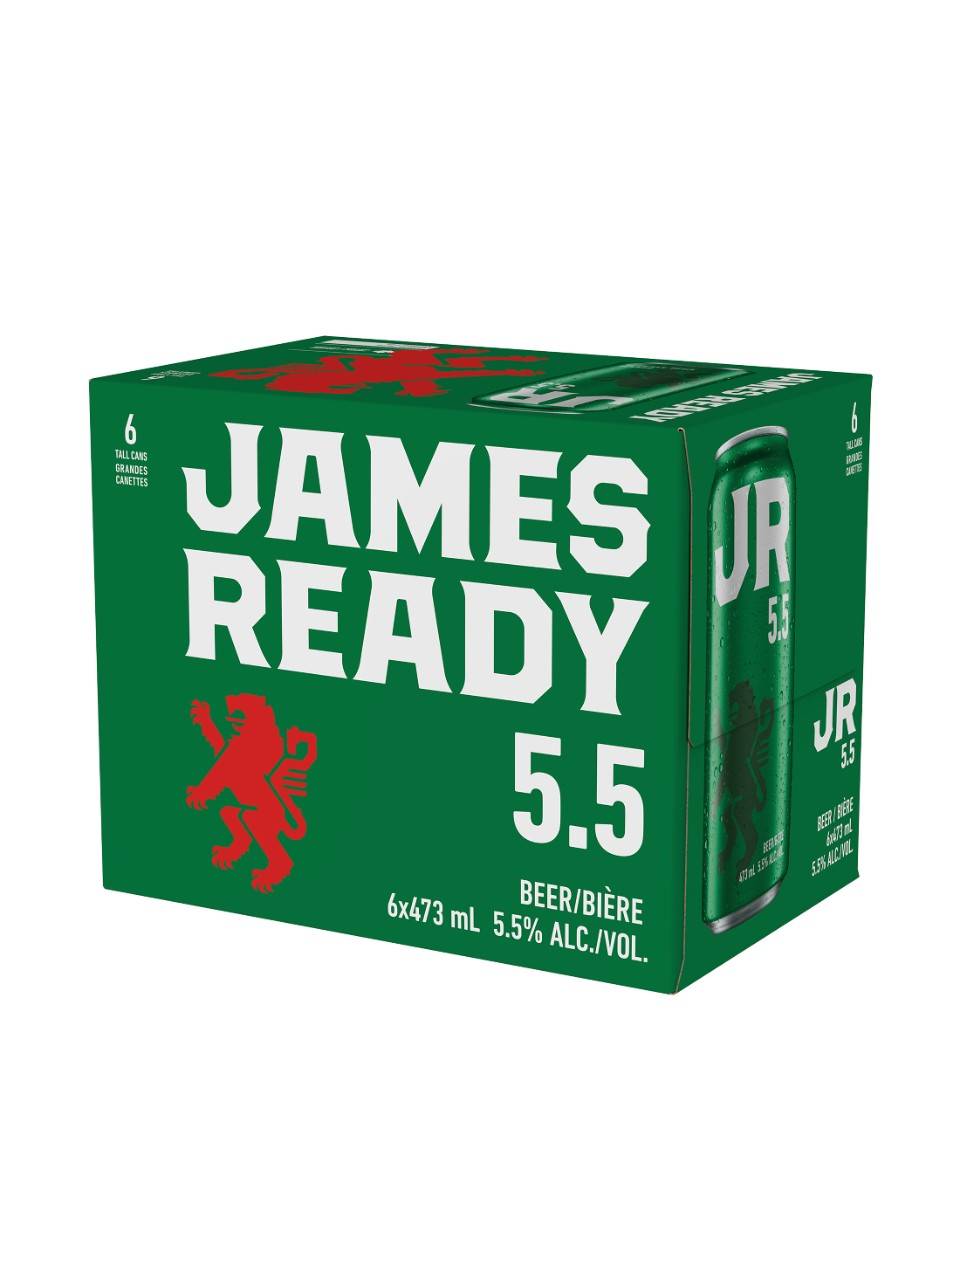 James Ready Lager Beer (6 pack, 473 ml)